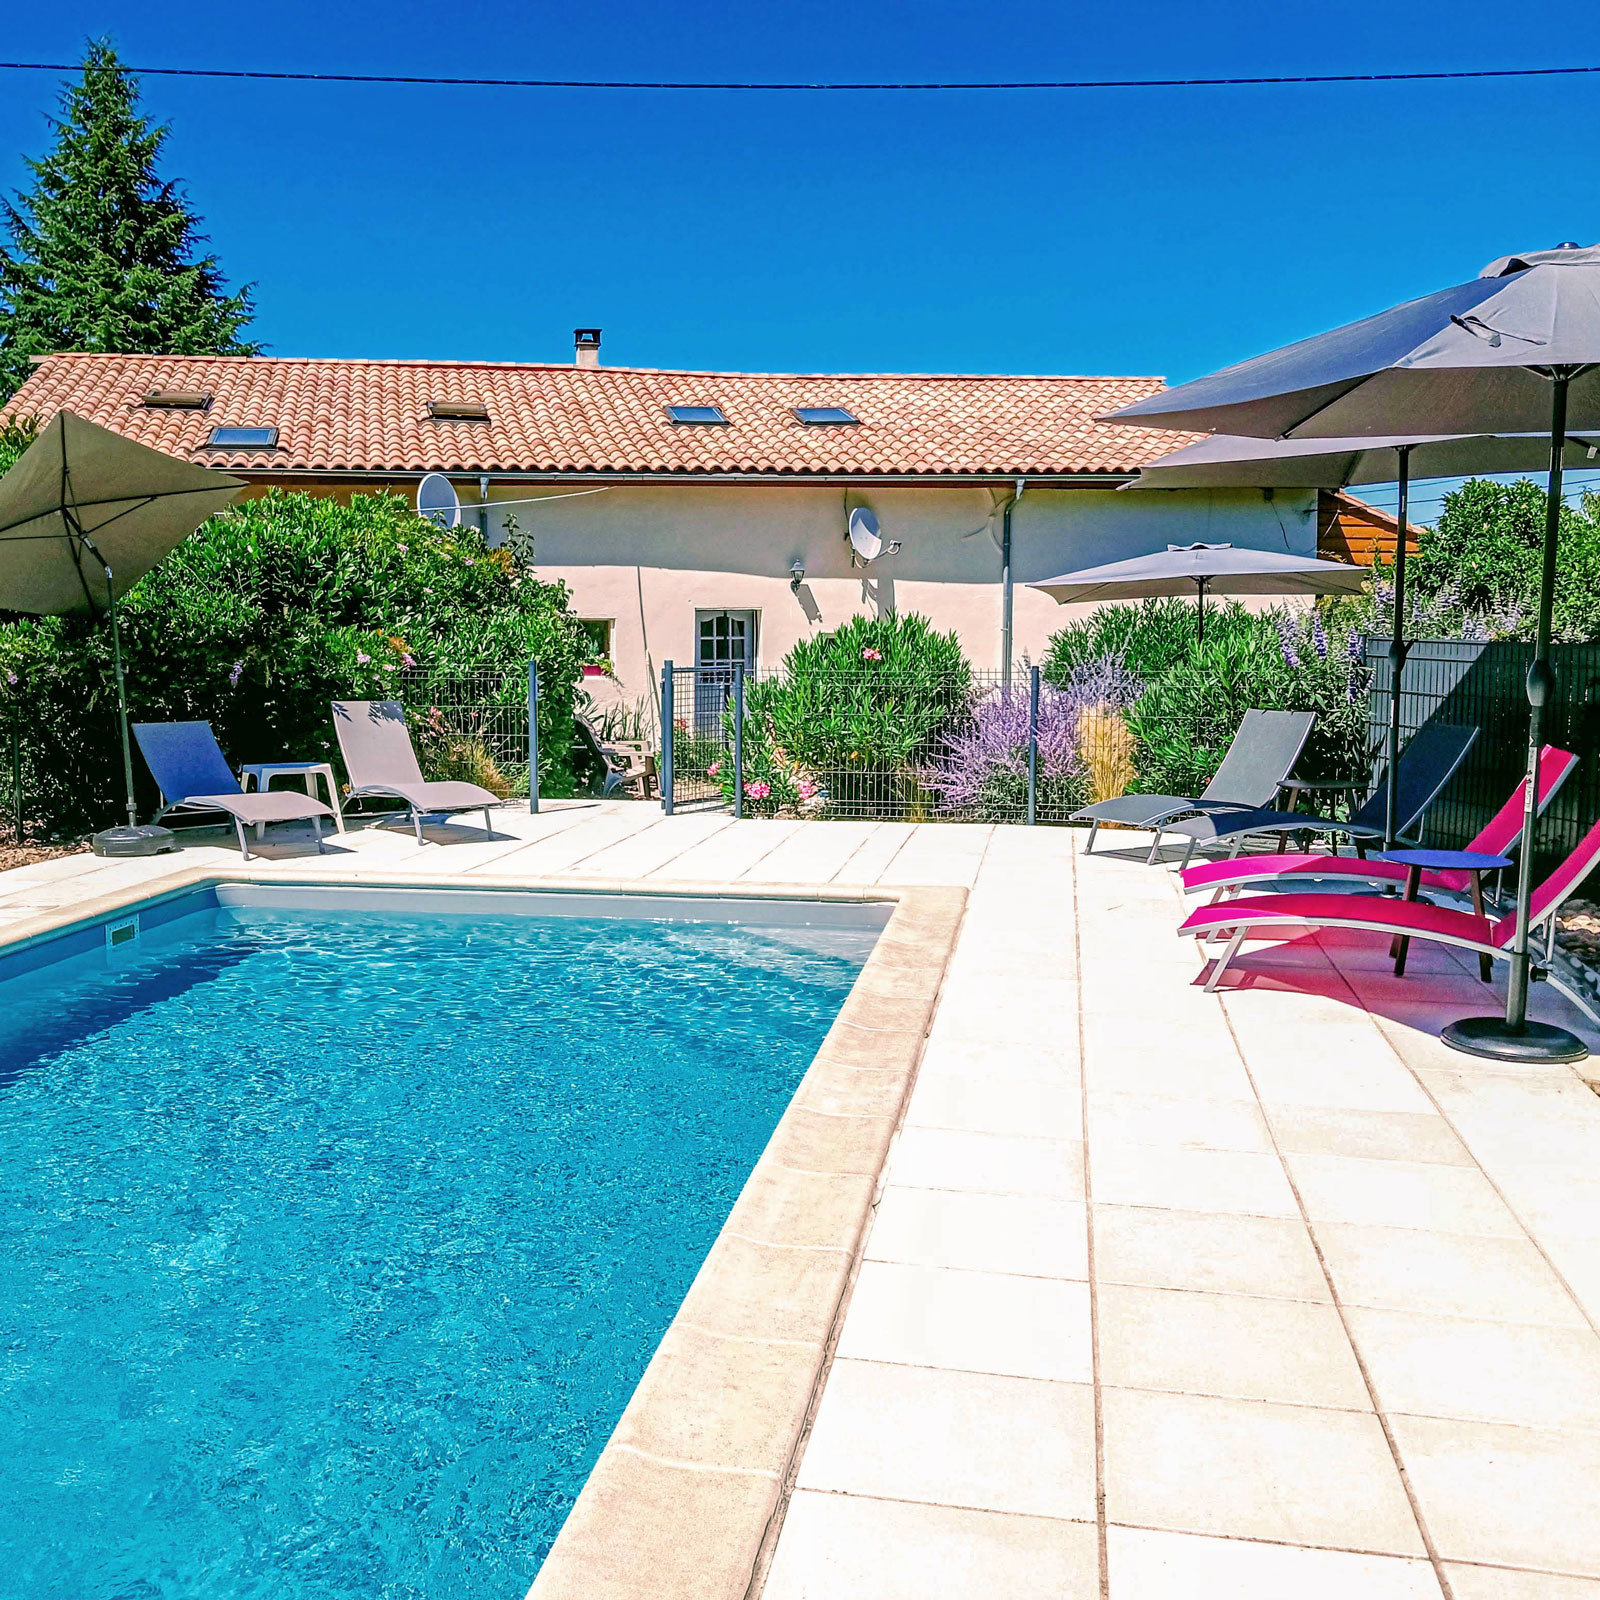 Gite Lavande in sw France with a Secure fenced and gated heated pool with an alarm